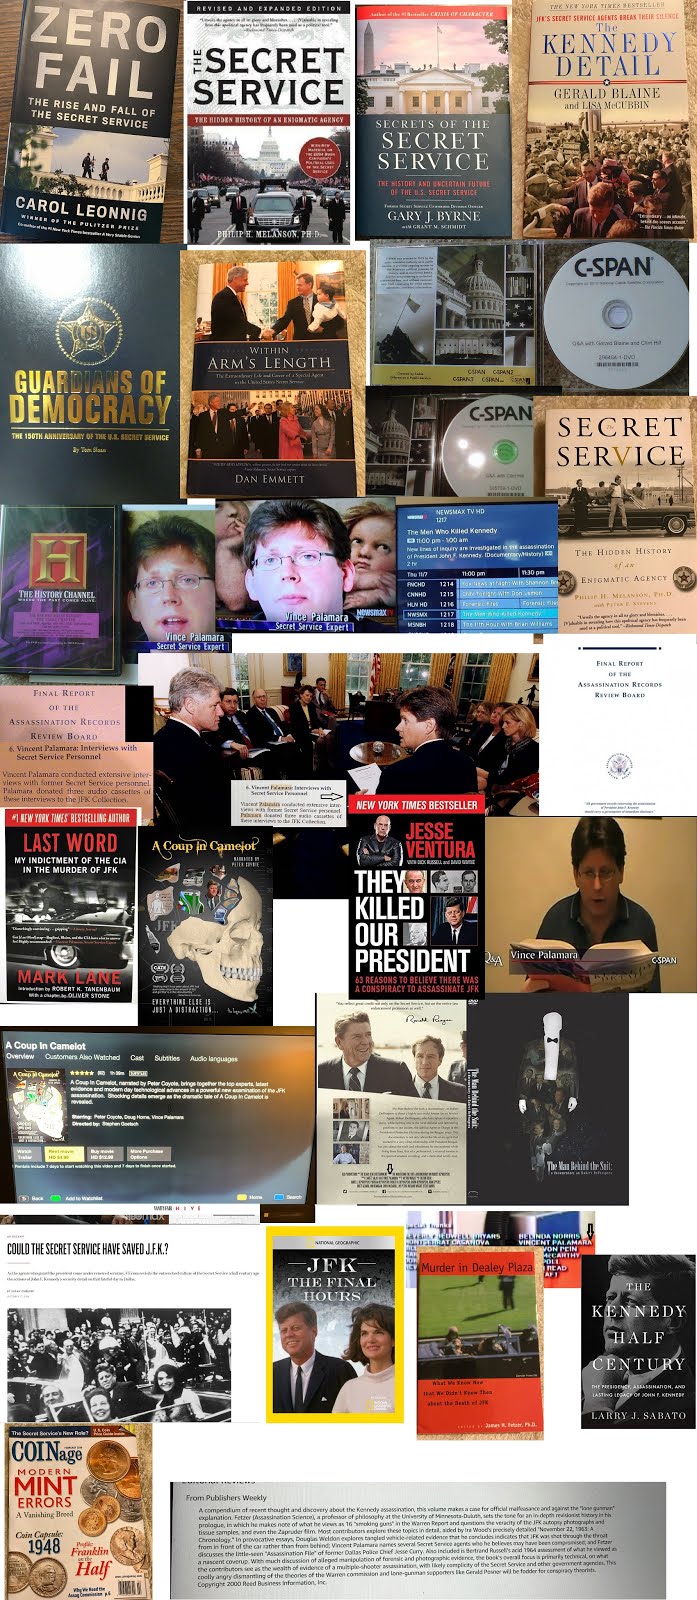 MAJOR SECRET SERVICE RELATED BOOKS/DVDS/BLU RAYS I AM REFERENCED IN